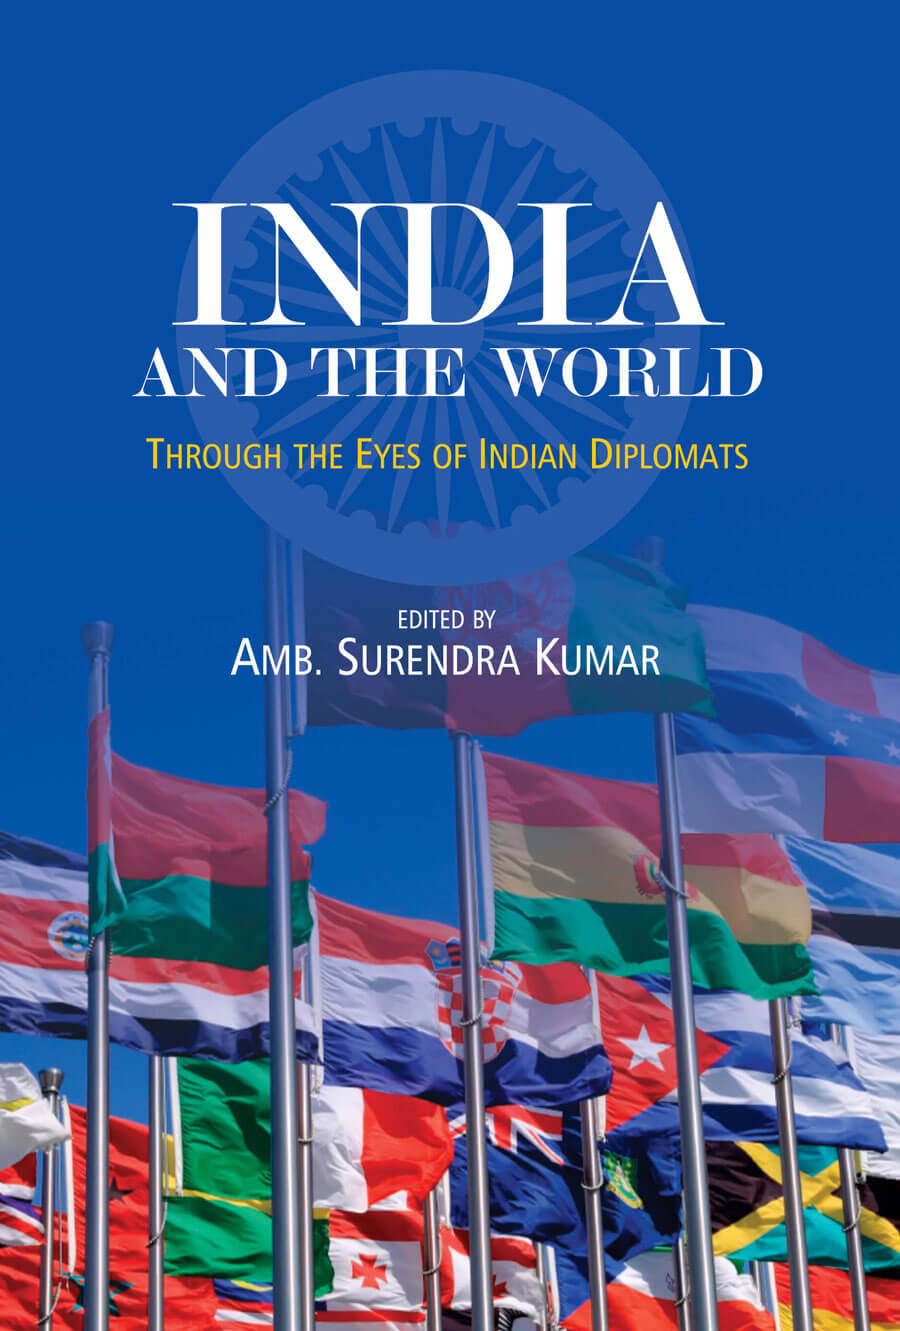 India And The World: Through The Eyes Of Indian Diplomats